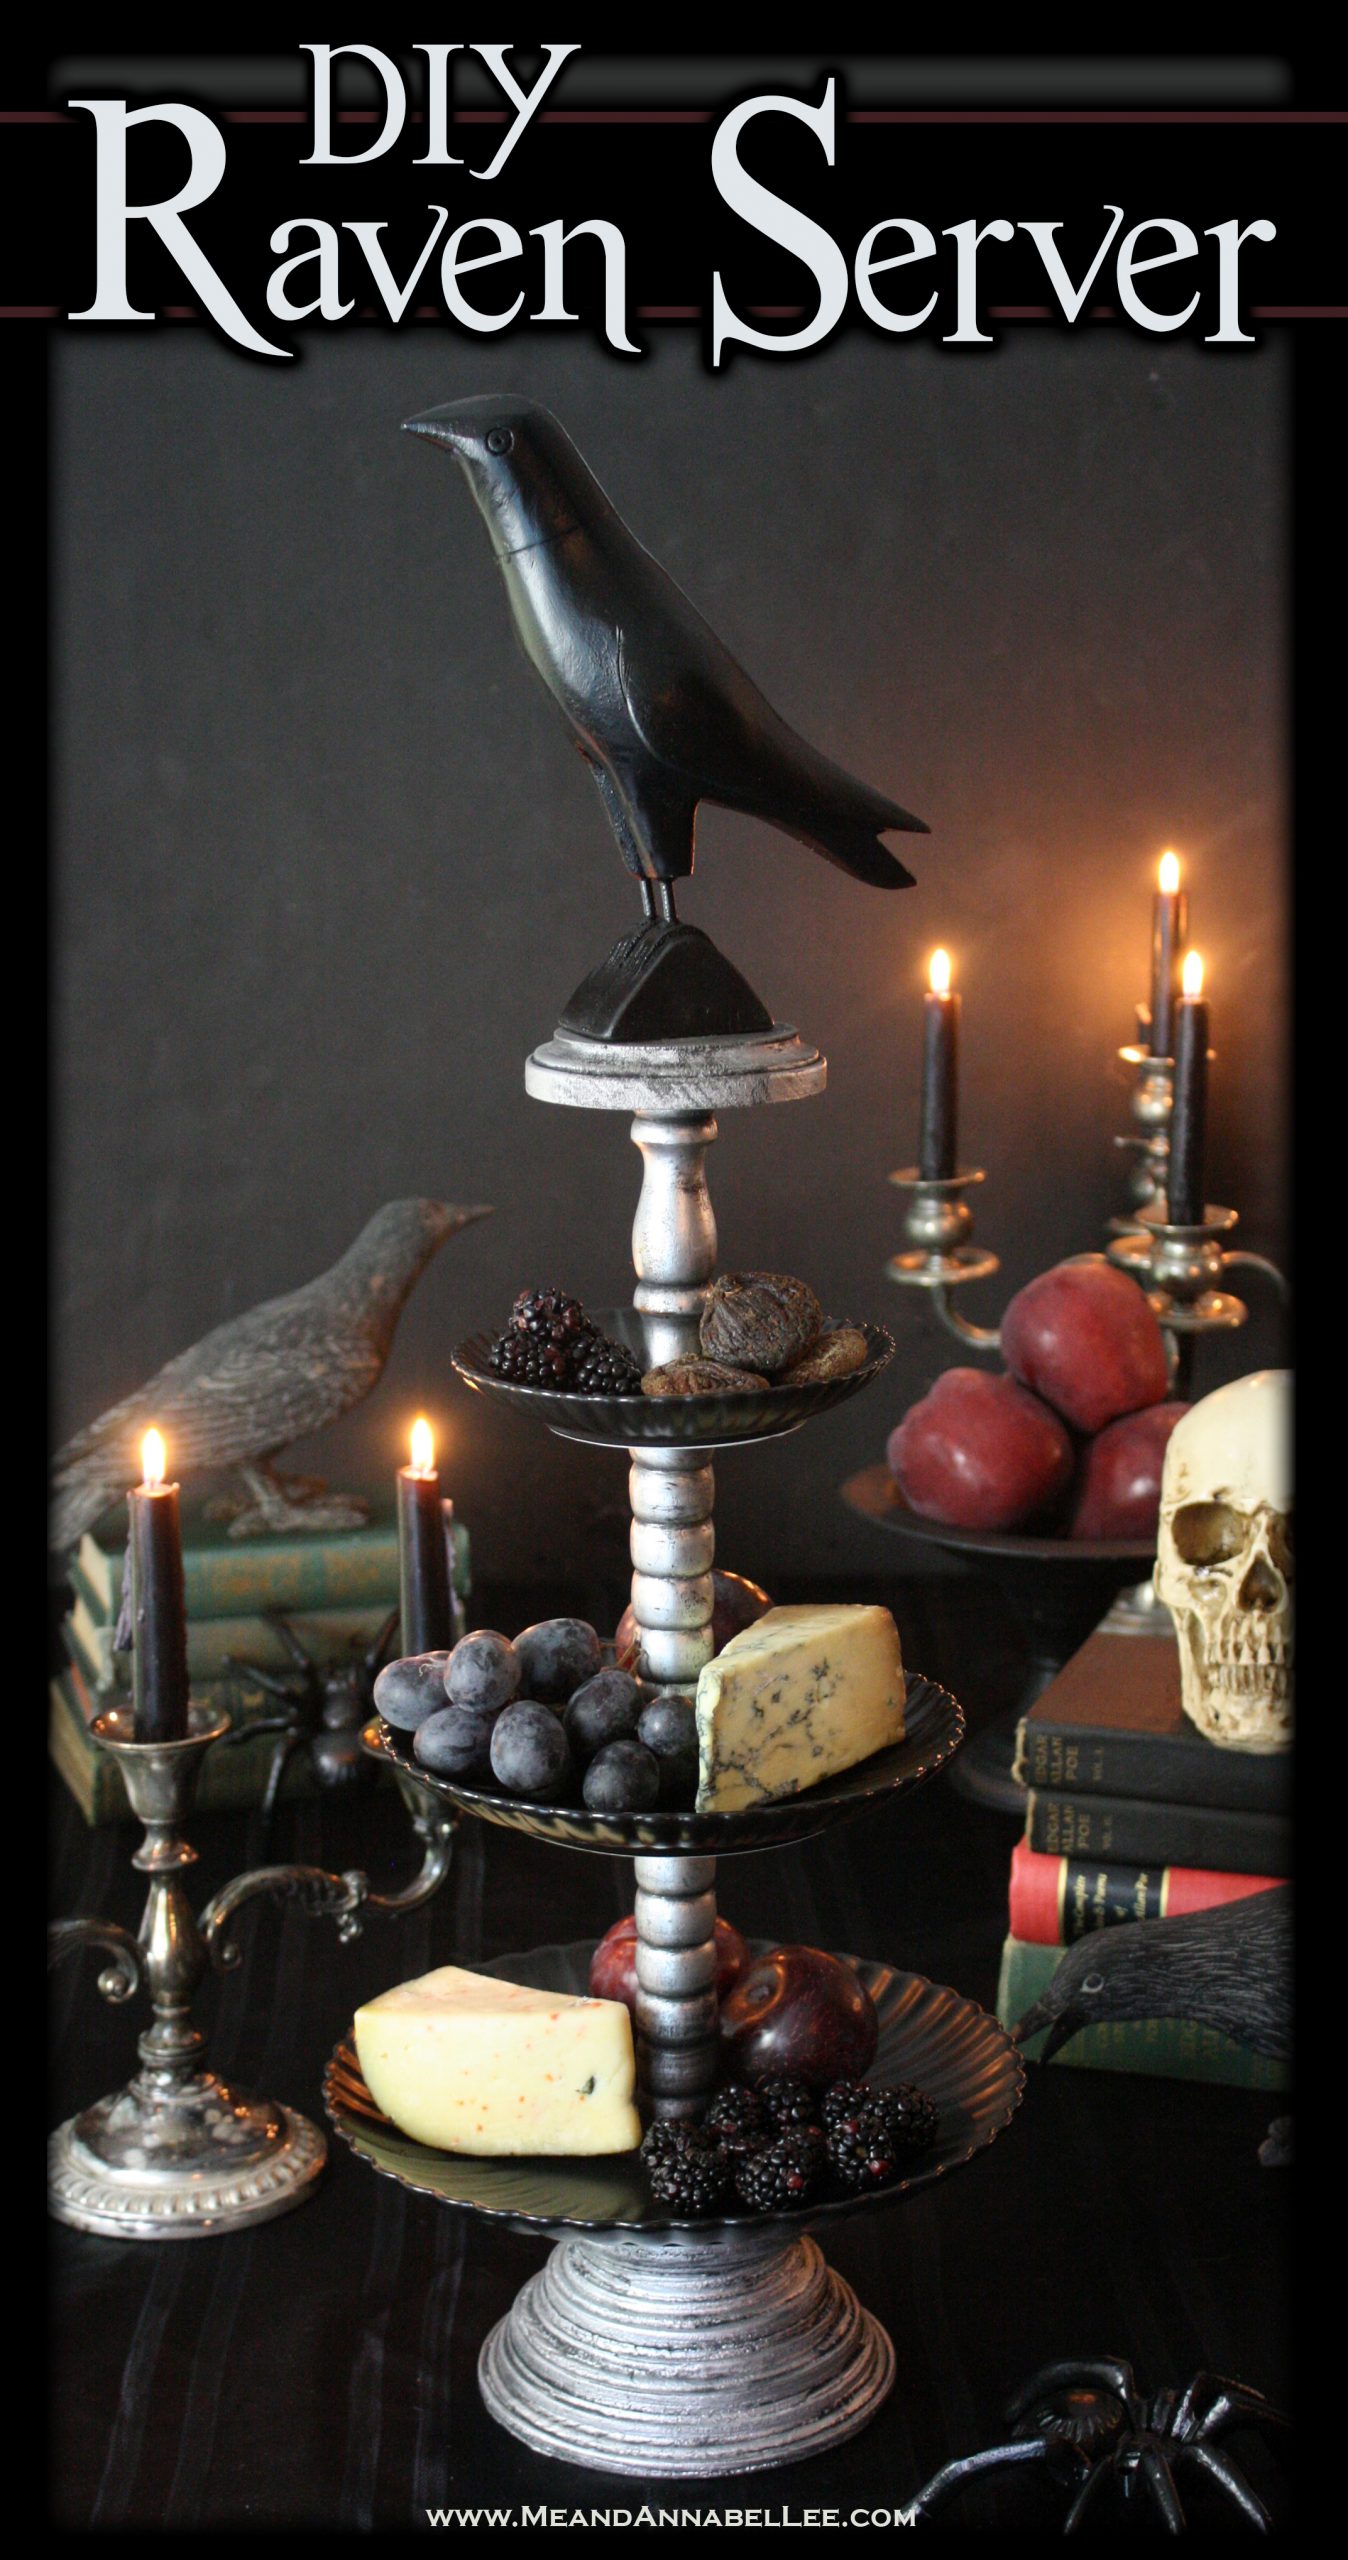 DIY Tiered Raven Halloween Serving Tray Tutorial | How to make a Gothic Server for your Halloween Party inspired by The Raven by Edgar Allan Poe | Goth it Yourself Dessert Stand | Gothic Entertaining | Copycat Grandin Road Halloween Decoration for all of your Gothic Entertaining | Me and Annabel Lee Blog